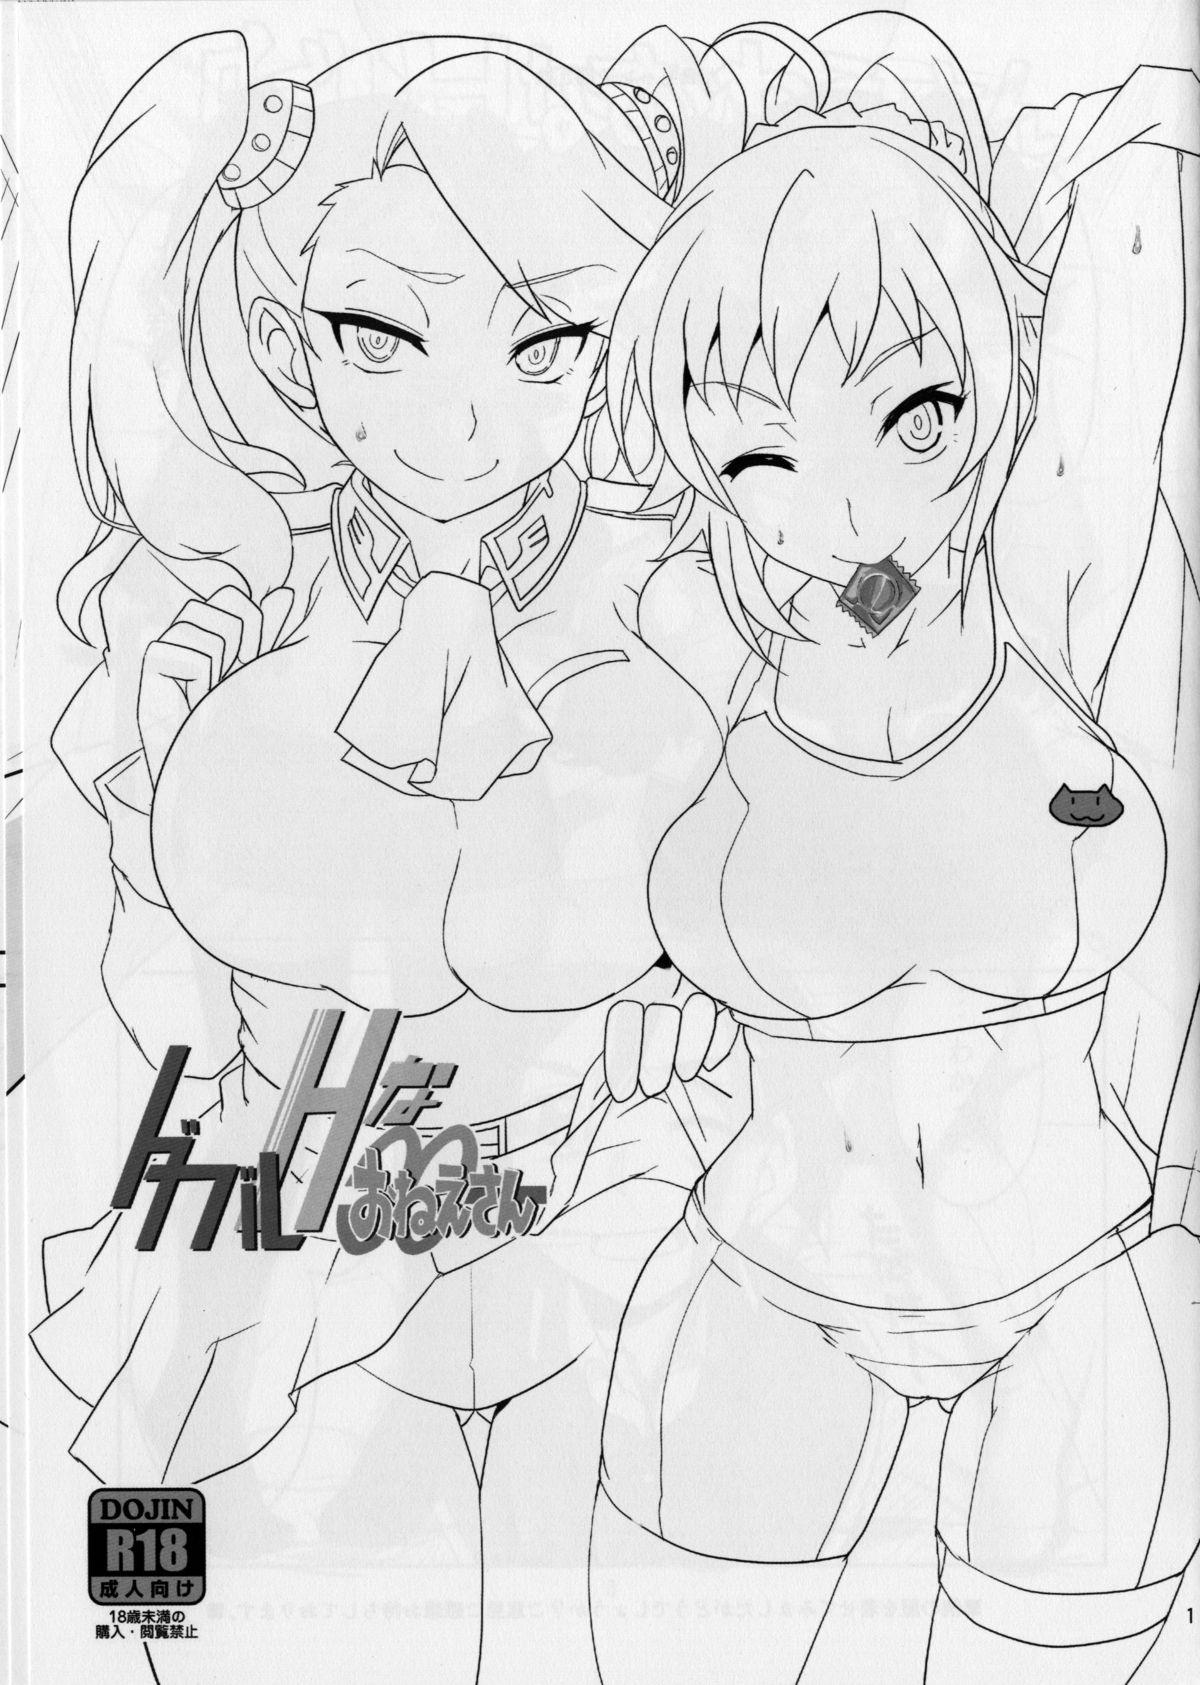 Men Double H na Onee-san - Gundam build fighters try Gay Anal - Page 3